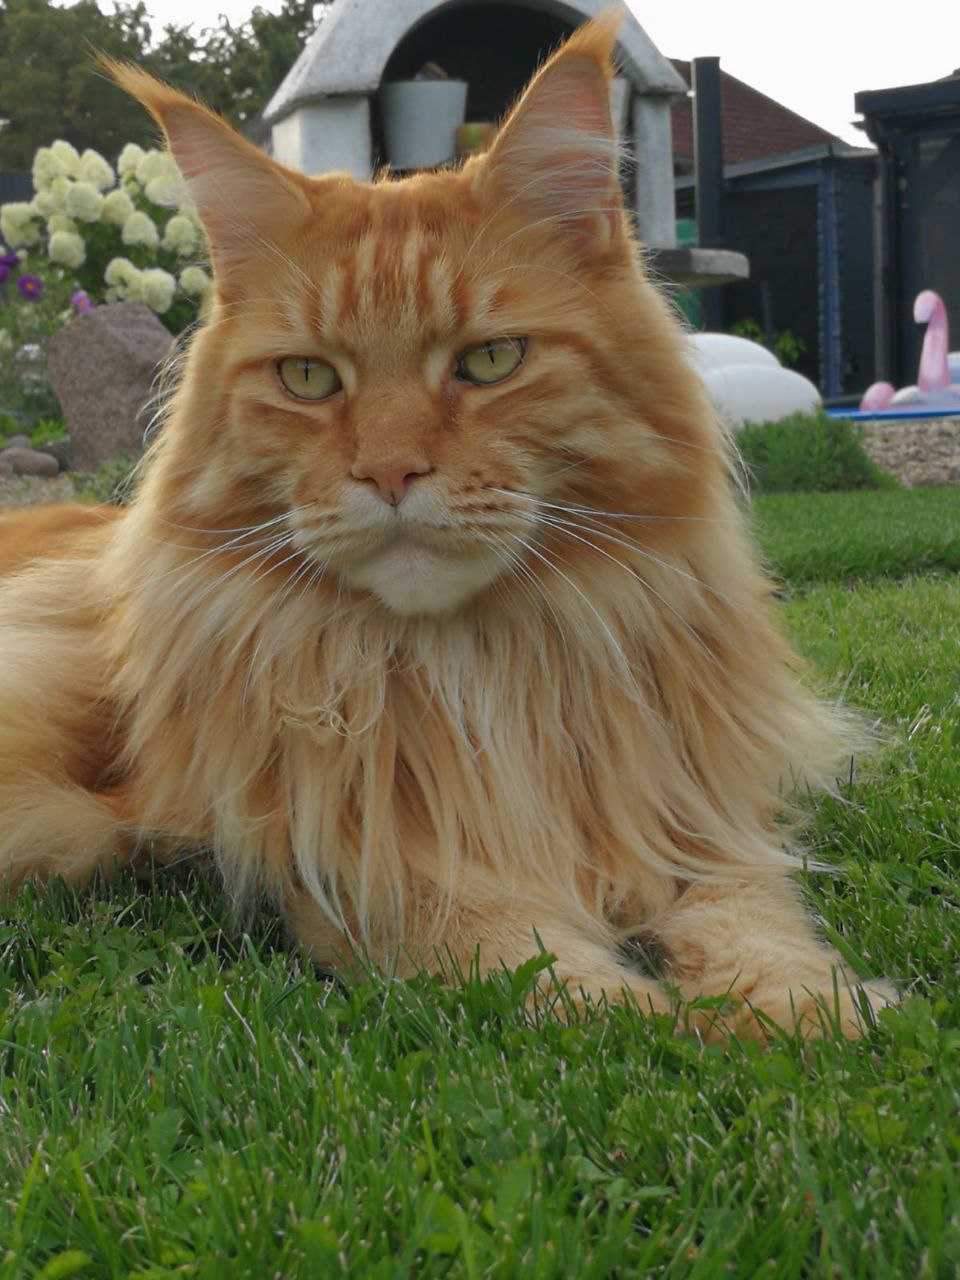 Ive of Maine Coon Castle